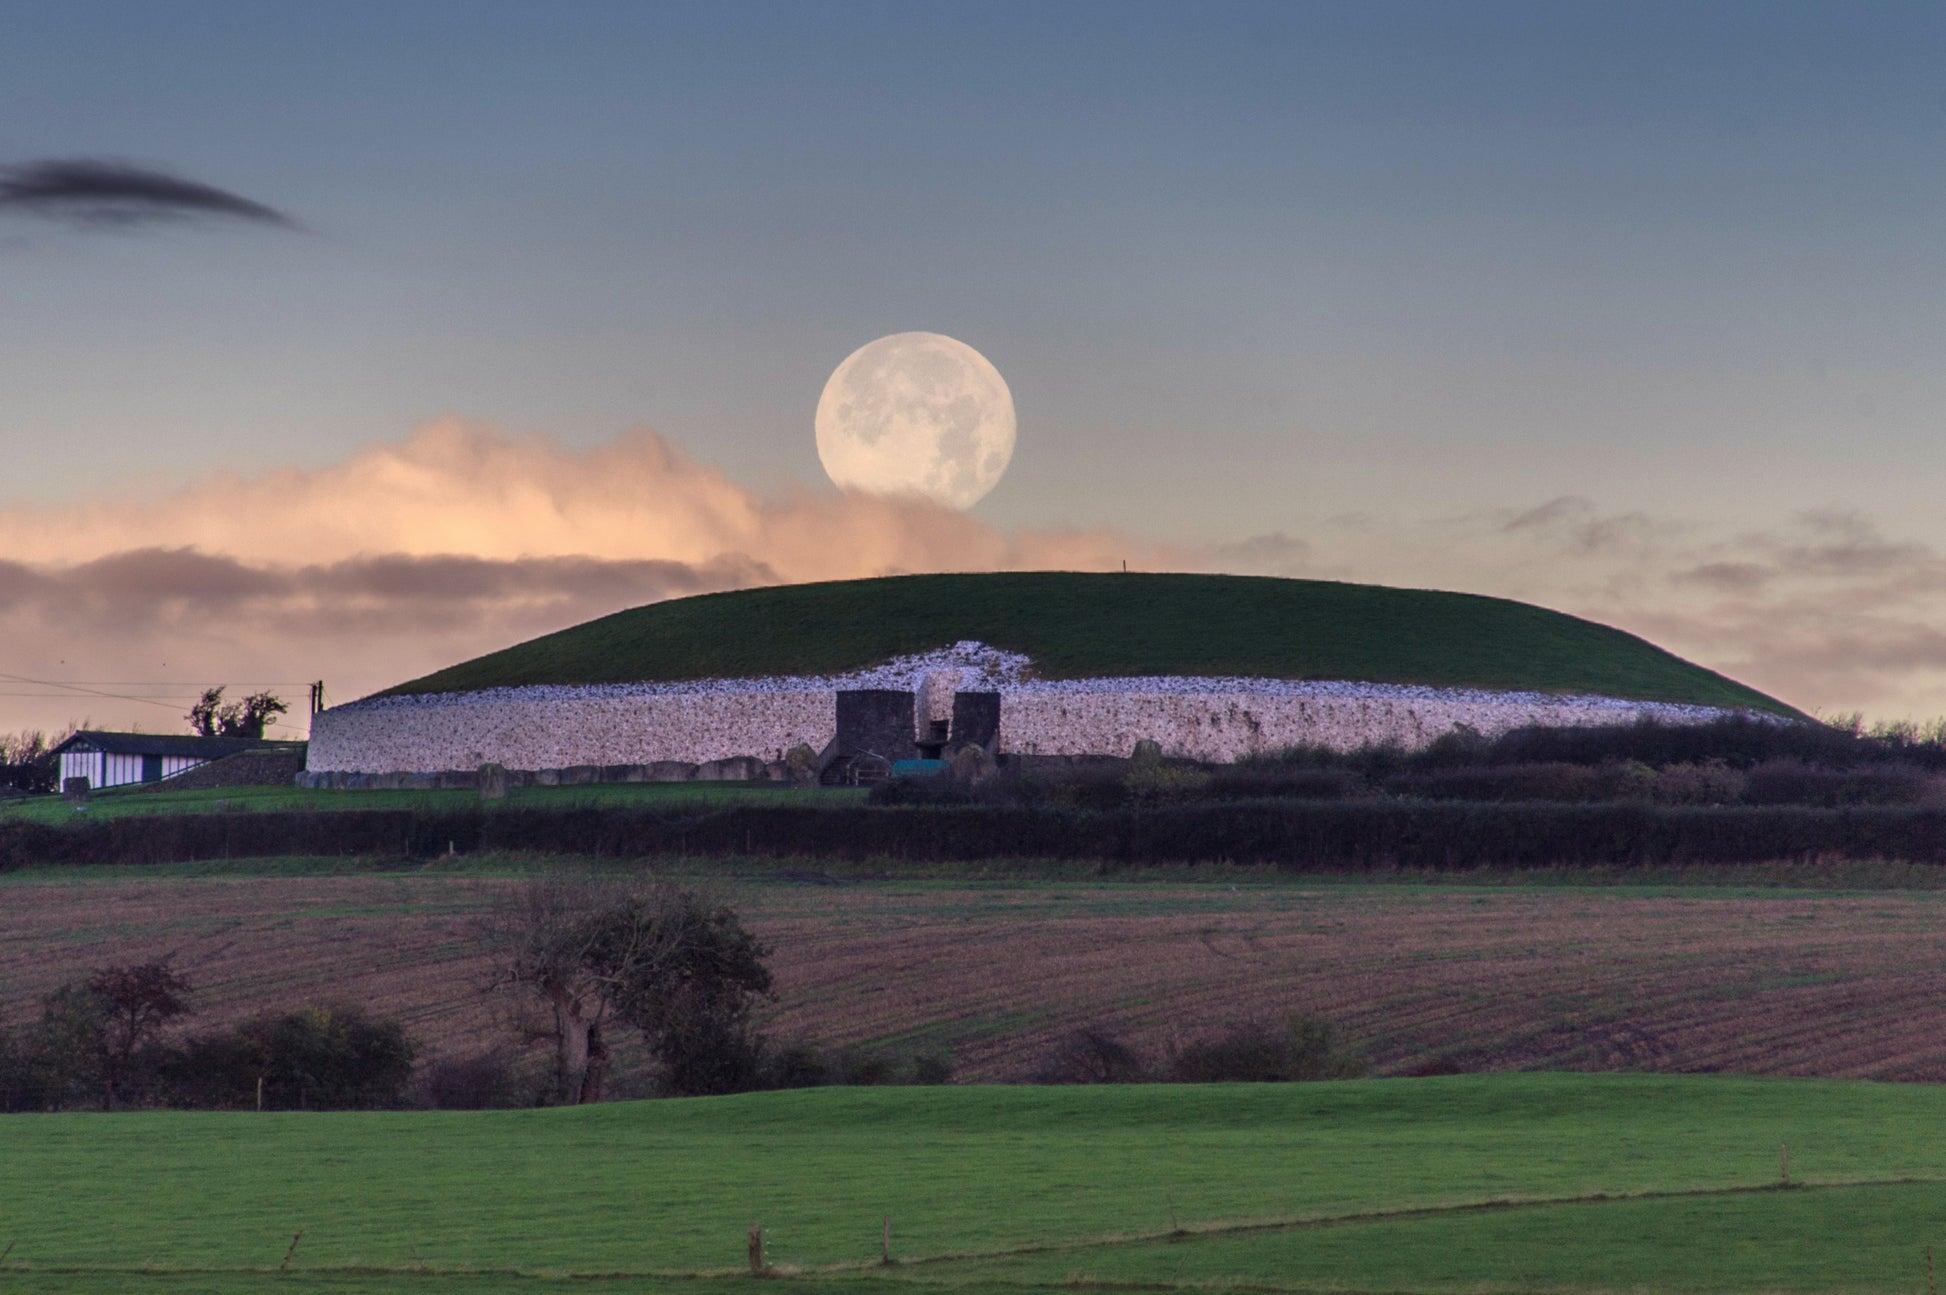 The full moon in winter time sets behind Newgrange as viewed from the south bank of the river Boyne